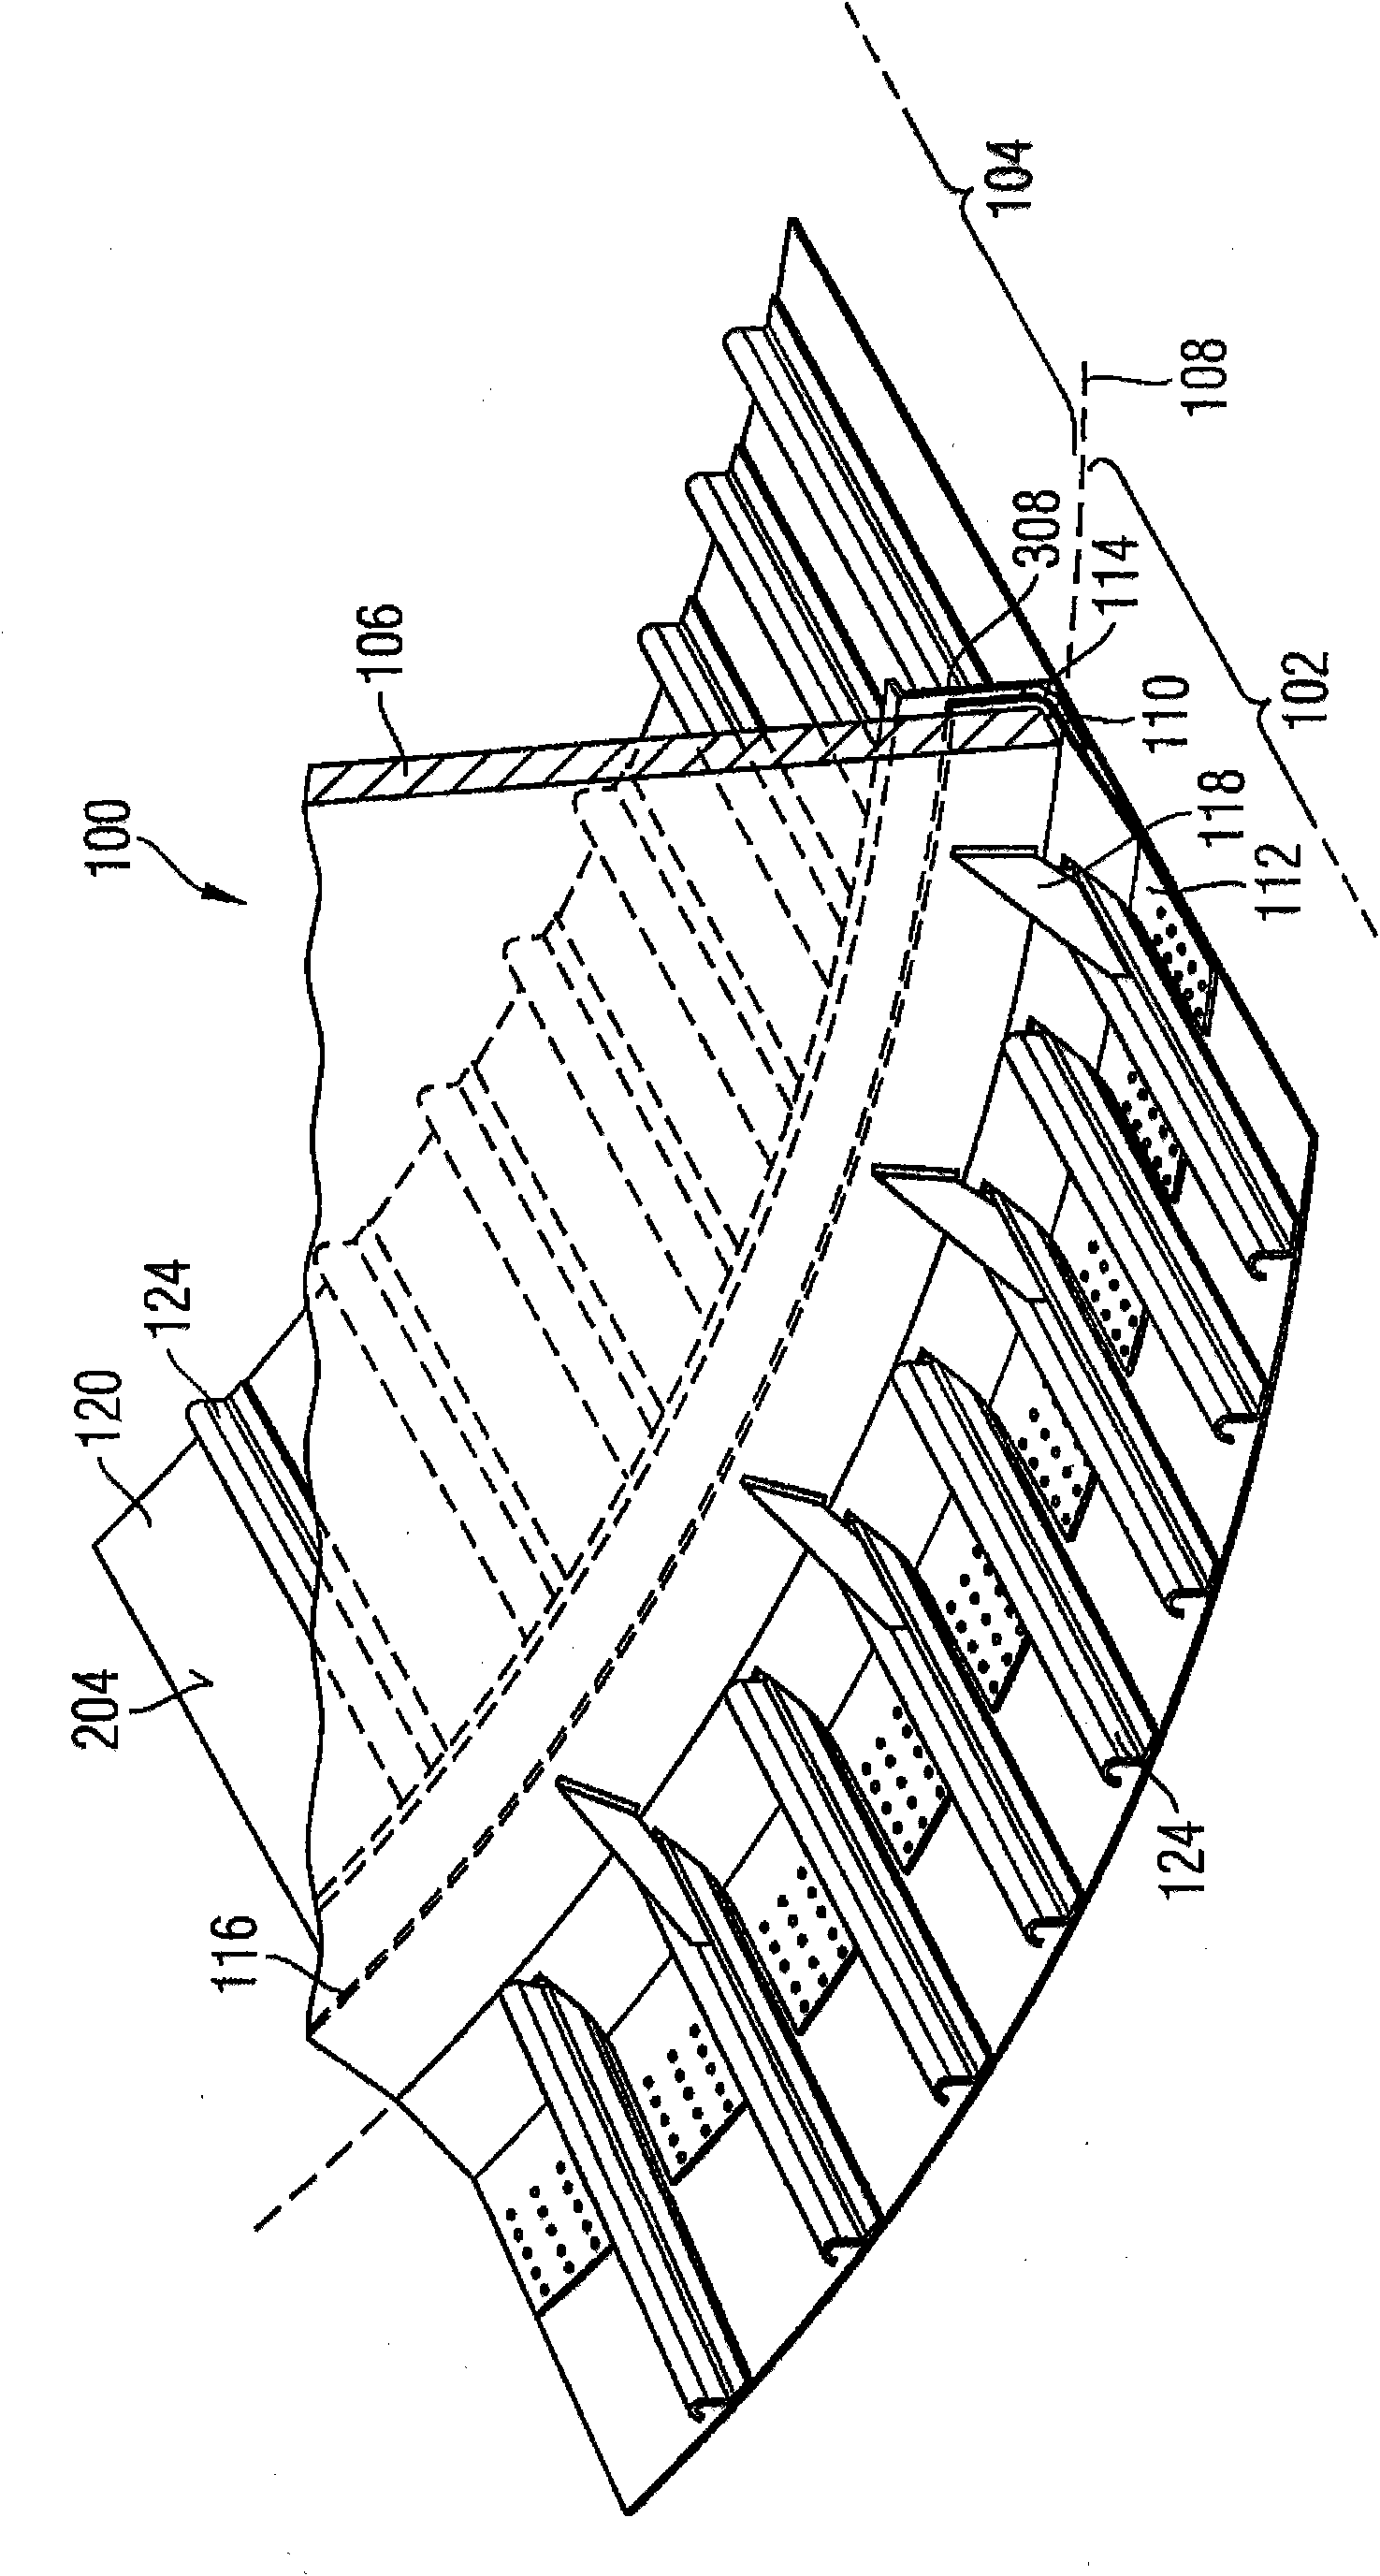 Pressure bulkhead and method for subdivision of an aircraft or spacecraft